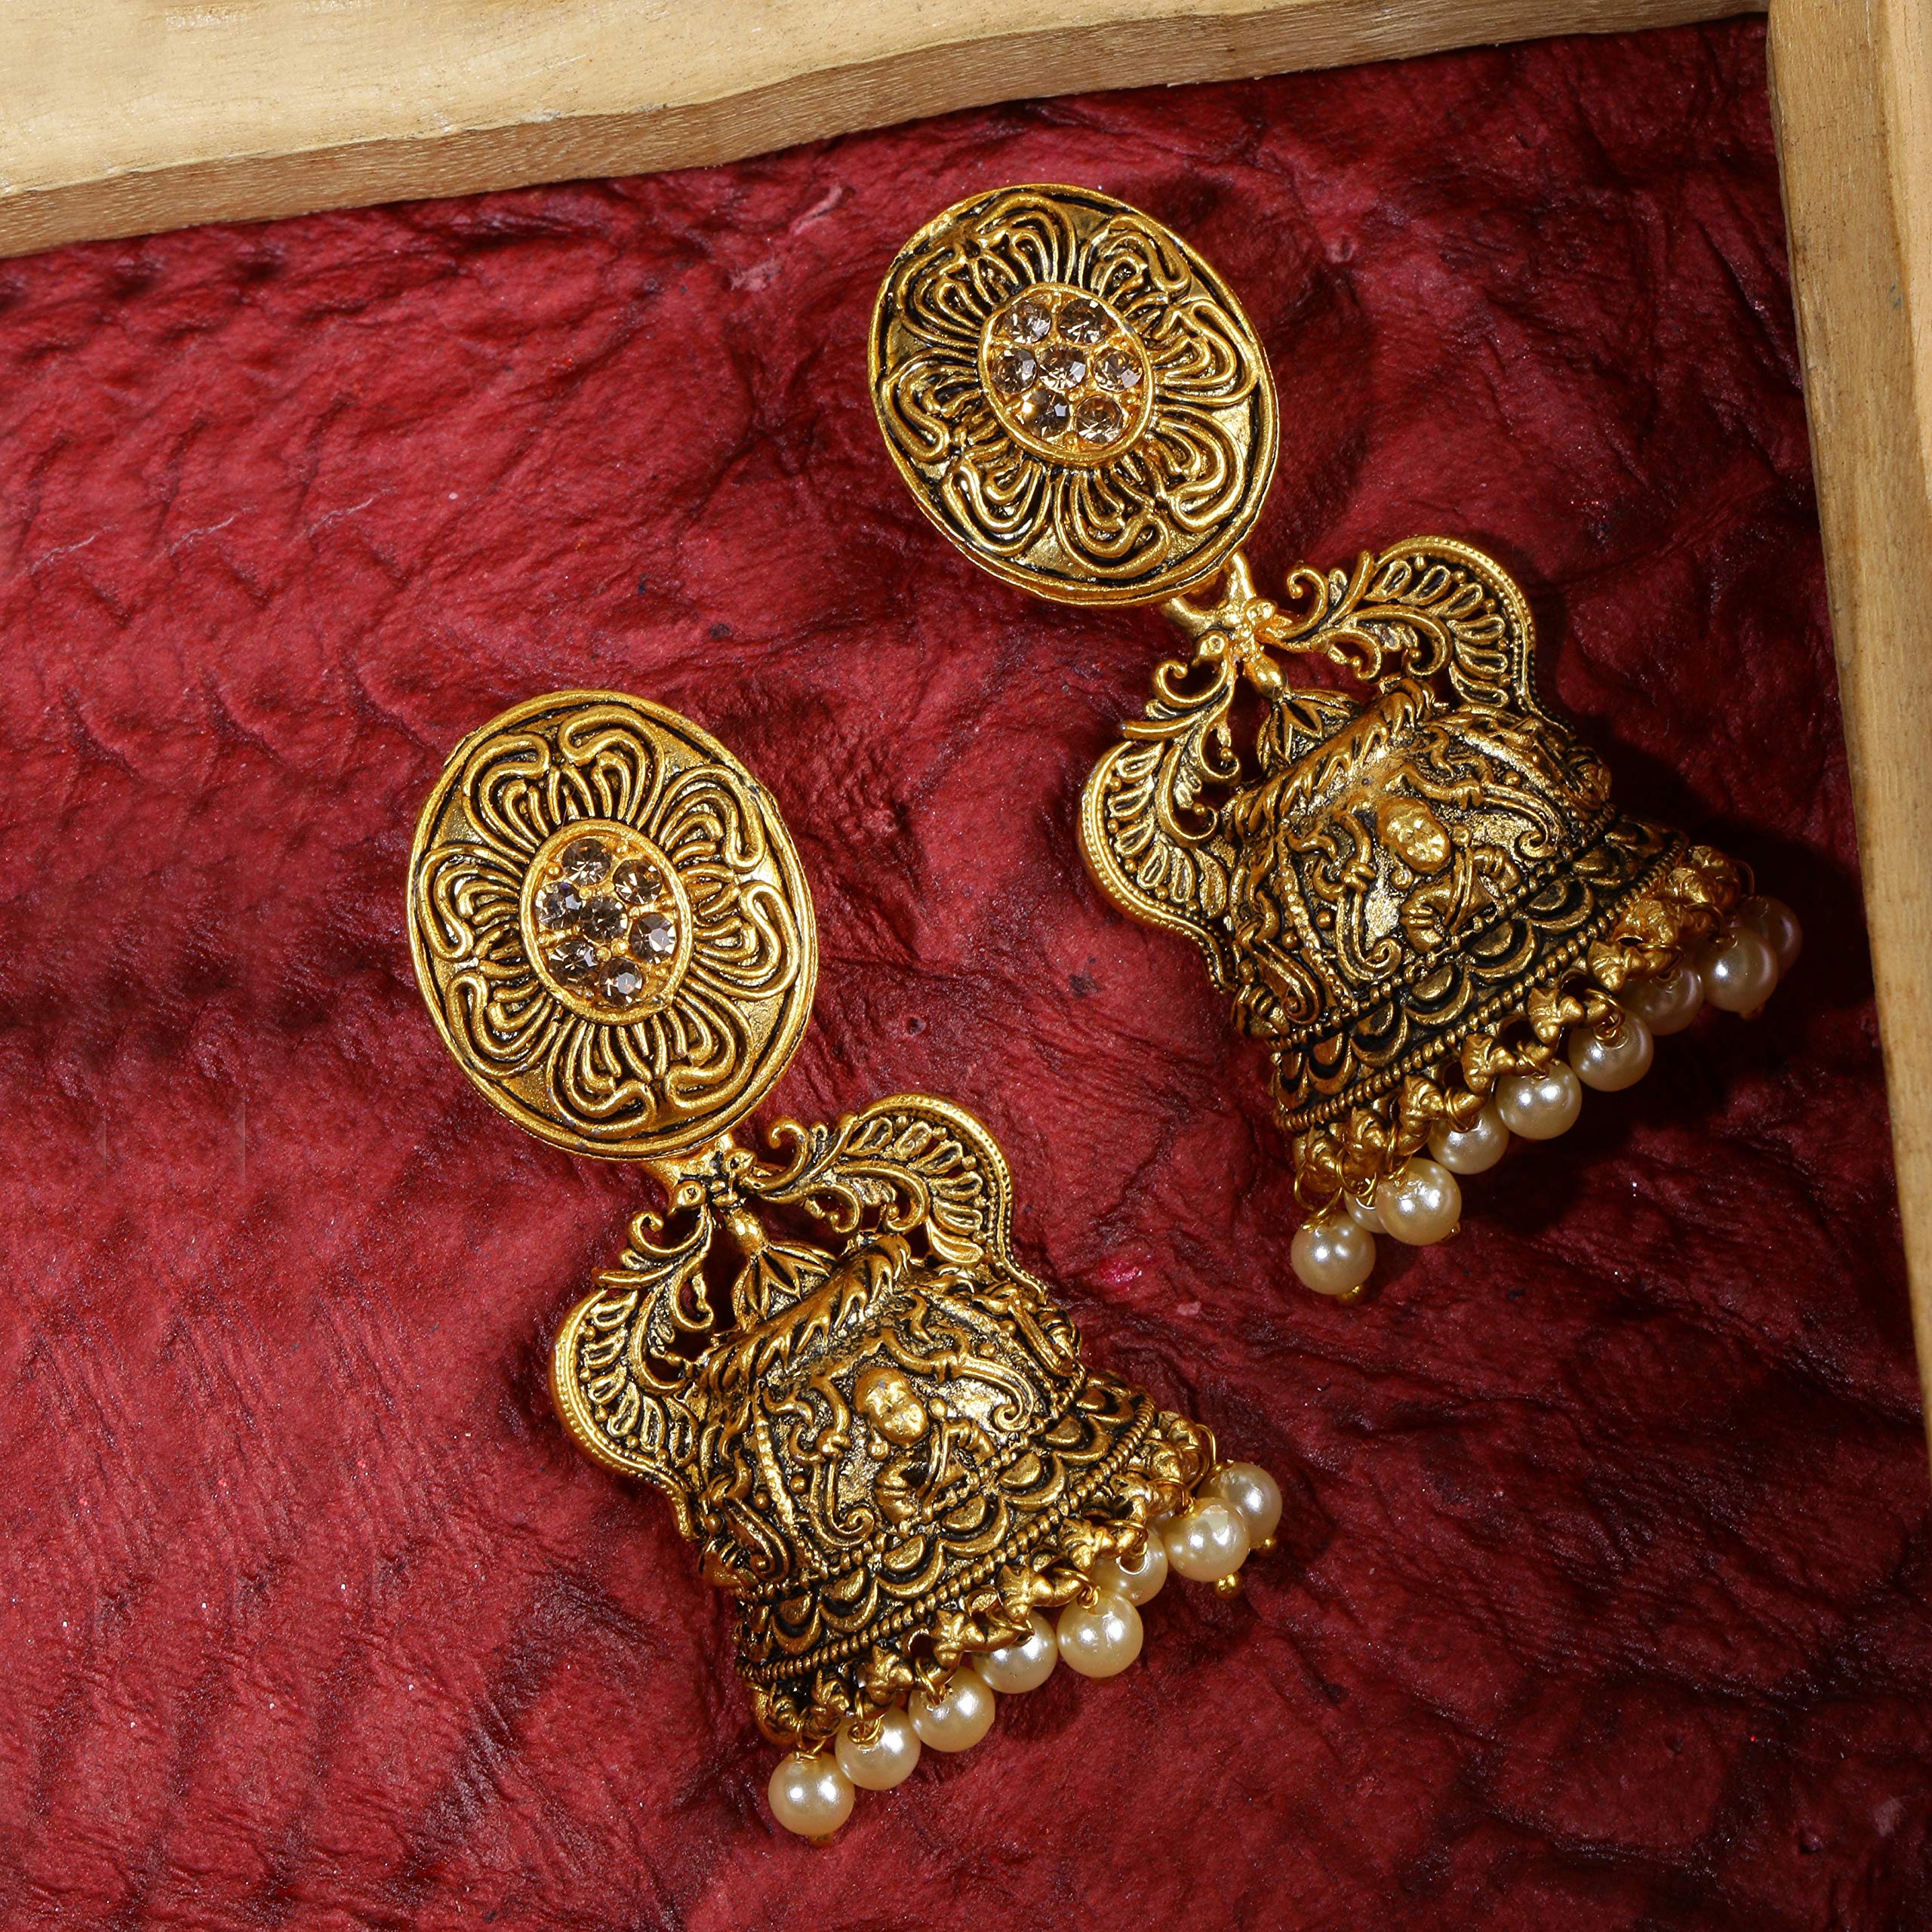 Yellow Chimes Traditional Jhumki Earrings Temple Jewellery Oxidized Matte Gold Plated Artistic Crafted Durga Design Jhumka Earrings for Women & Girls